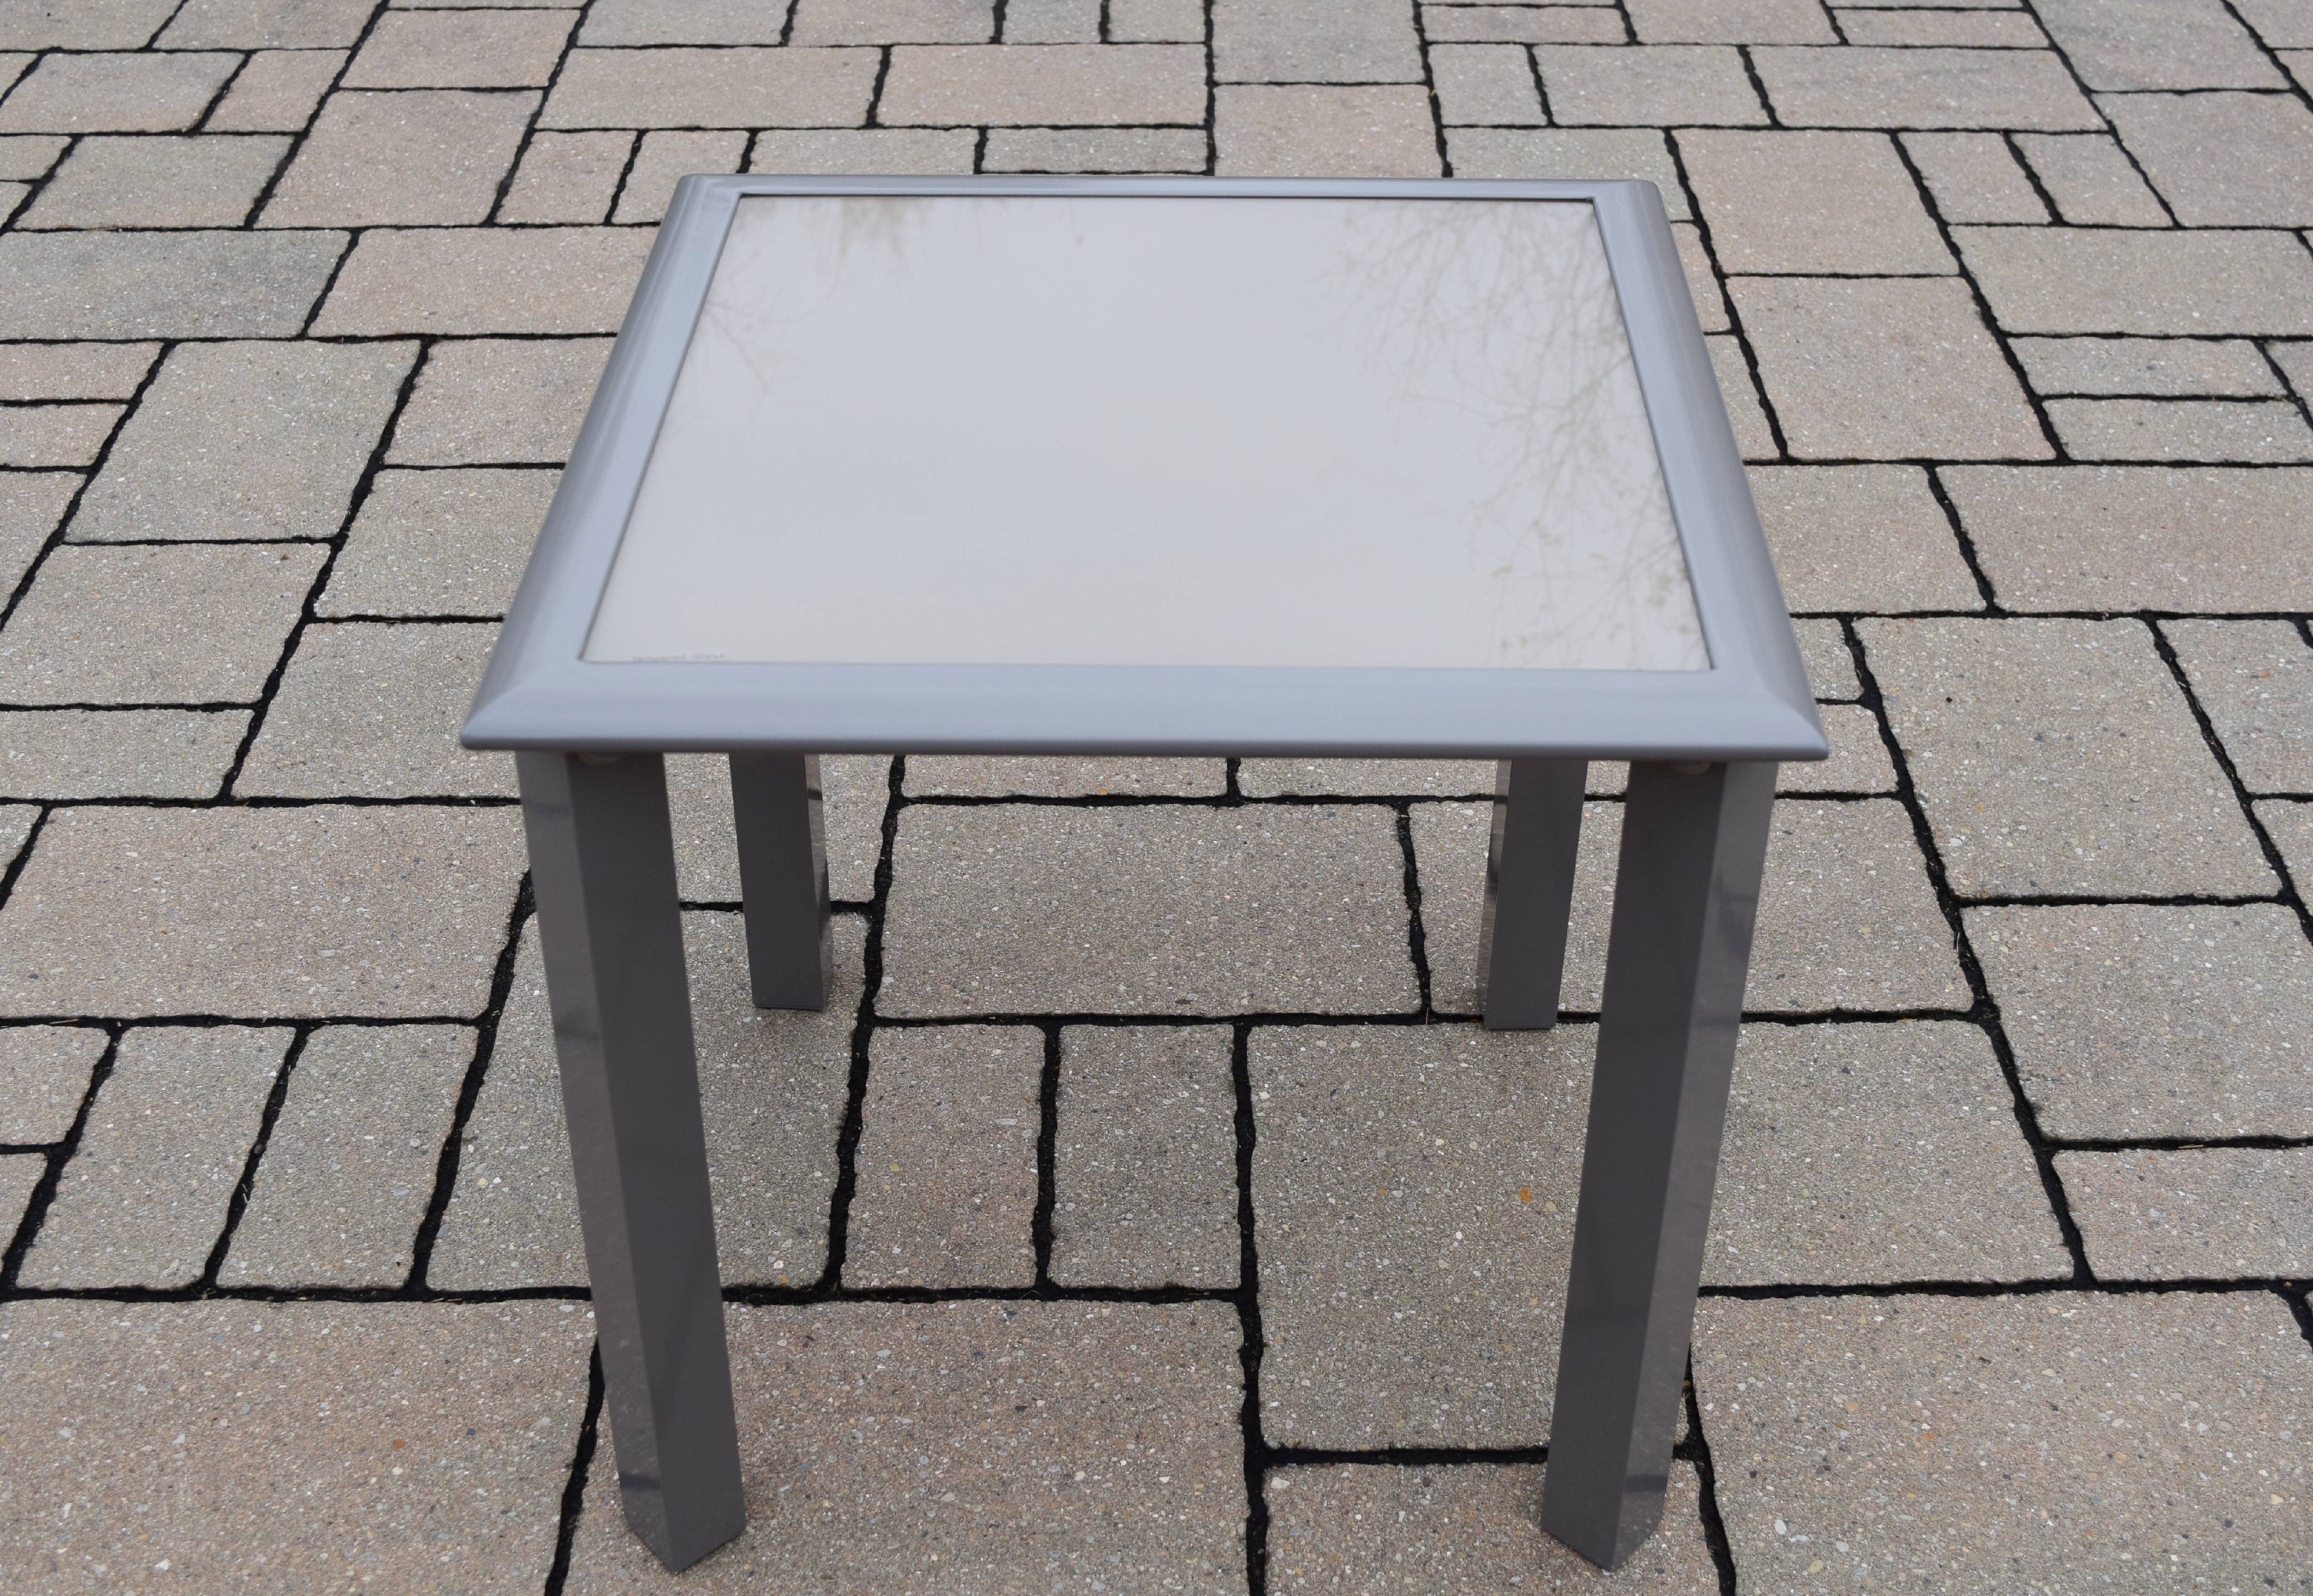 CC Outdoor Living 18" Sand Colored Outdoor Screen Printed Patio Glass Top Side Table - image 1 of 2